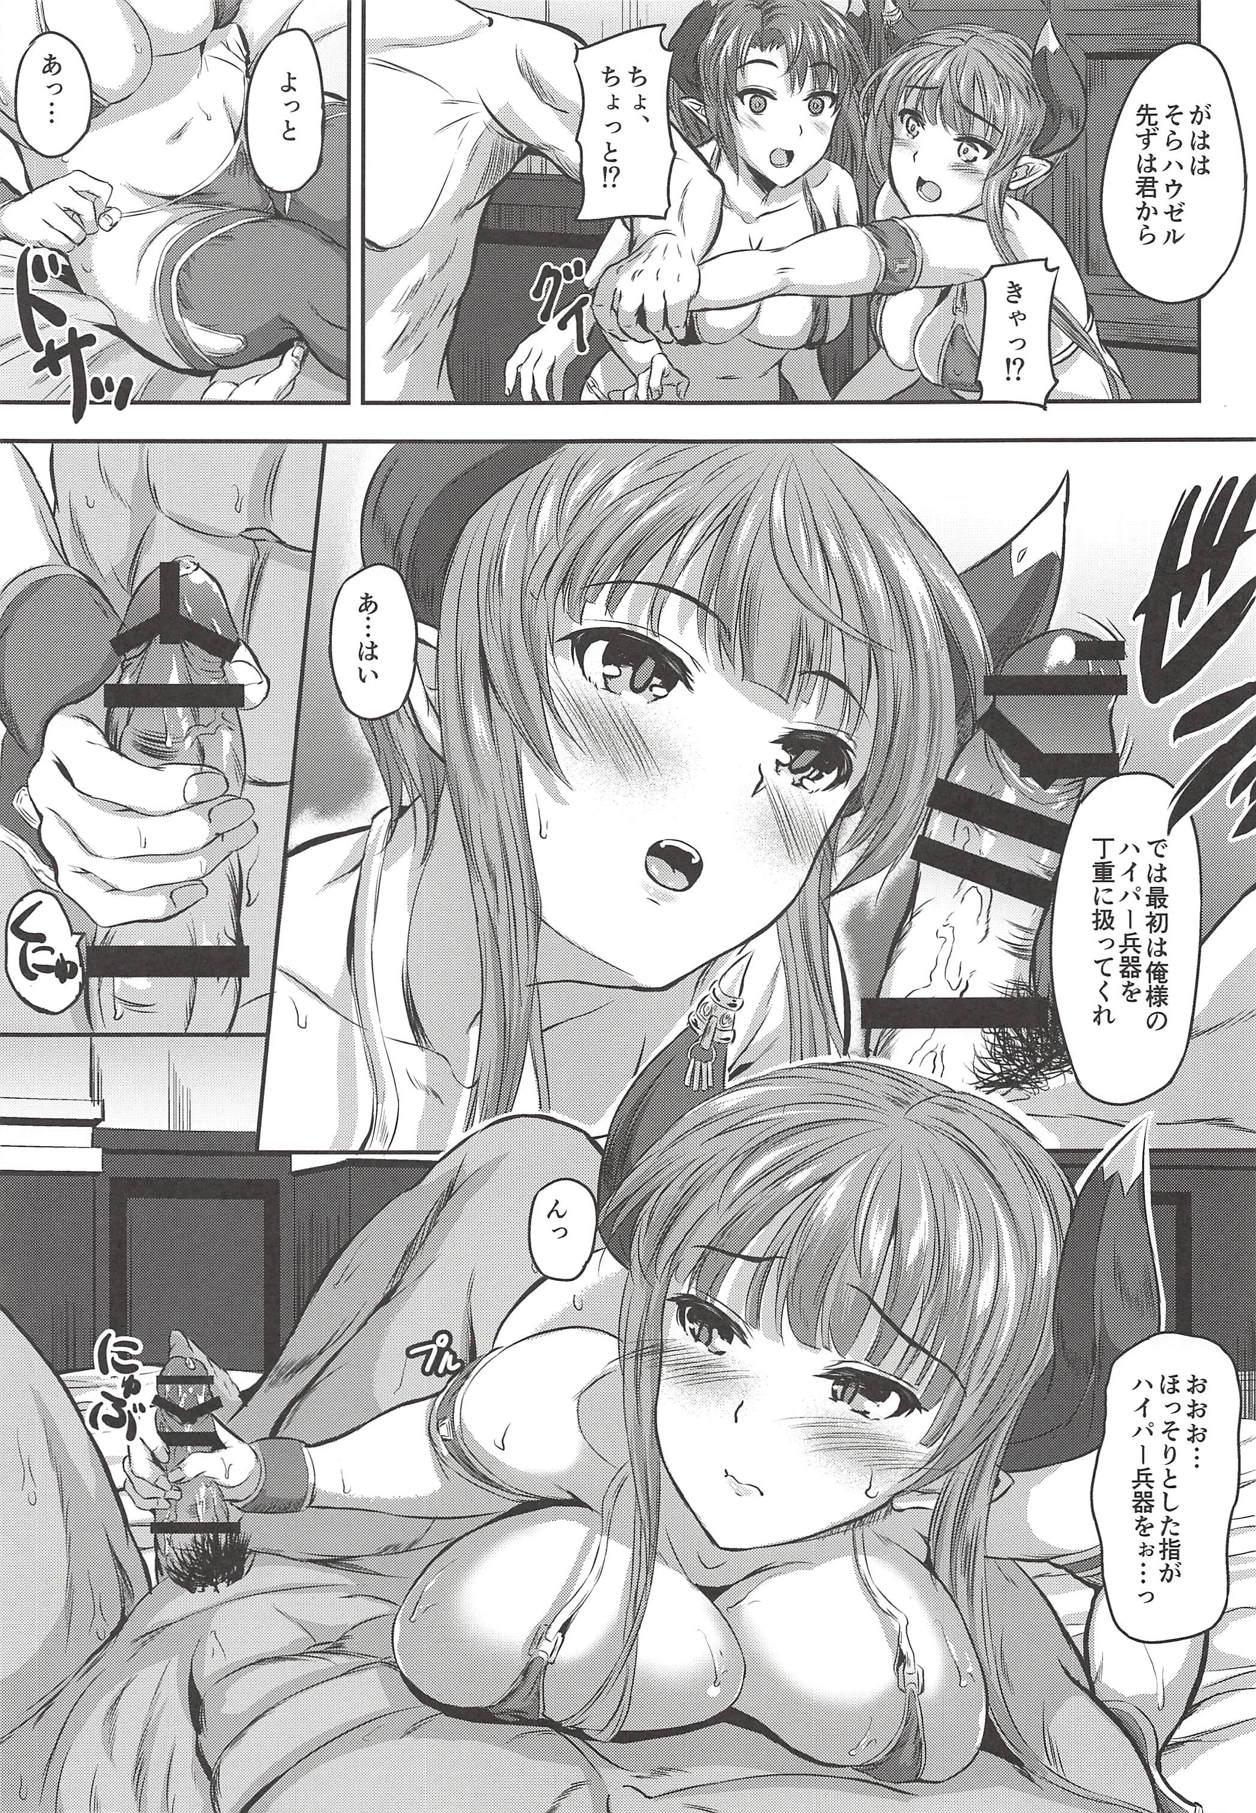 Ex Gf Sisters that get along well - Rance Maledom - Page 4